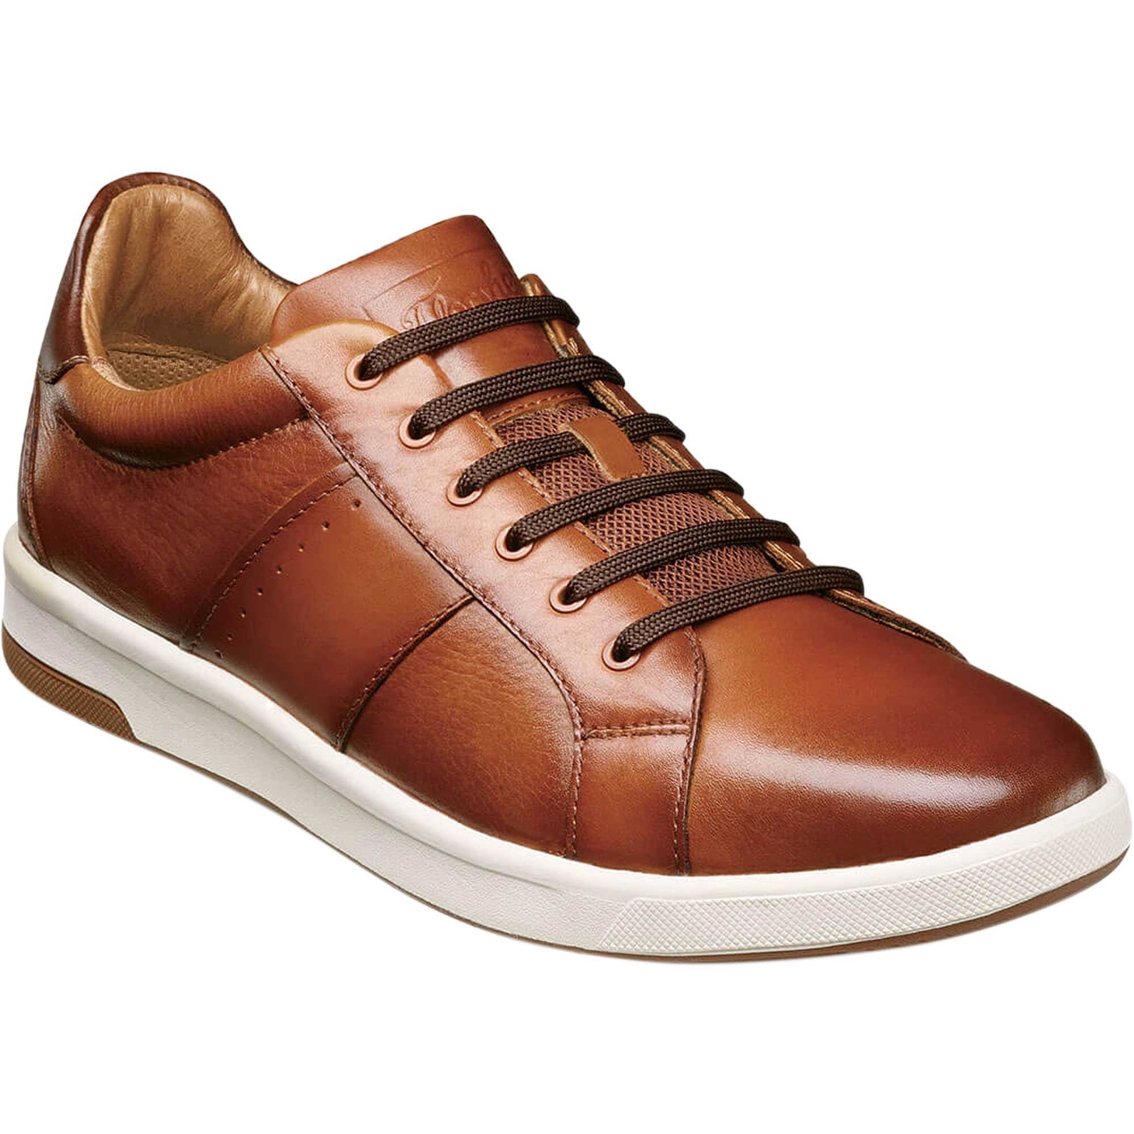 Florsheim Crossover Lace To Toe Oxford Shoes | Casuals | Shoes | Shop ...